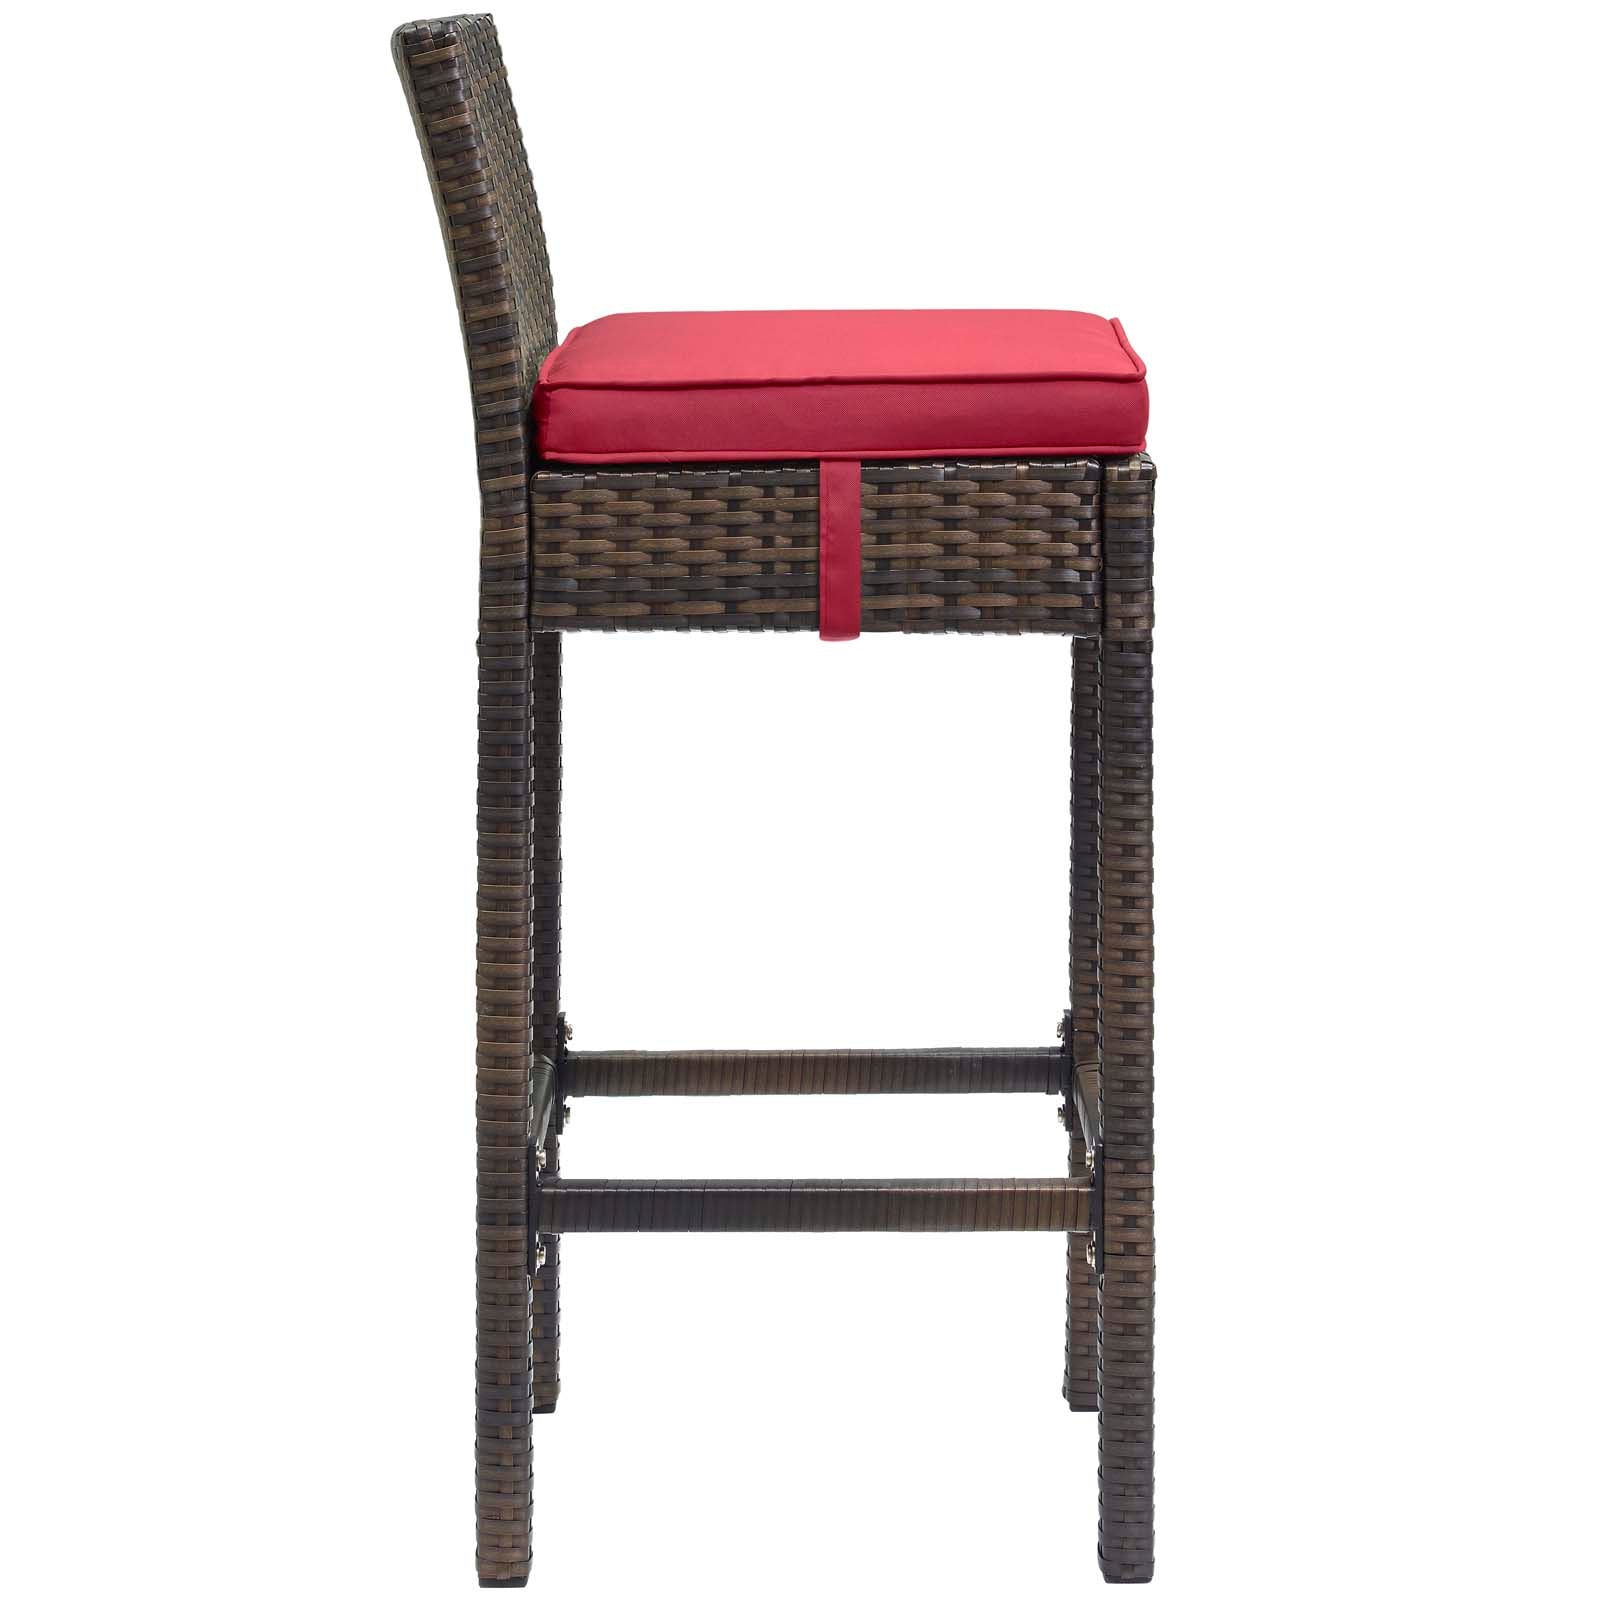 Modway Outdoor Barstools - Conduit Bar Stool Outdoor Patio Wicker Rattan Set of 2 Brown Red